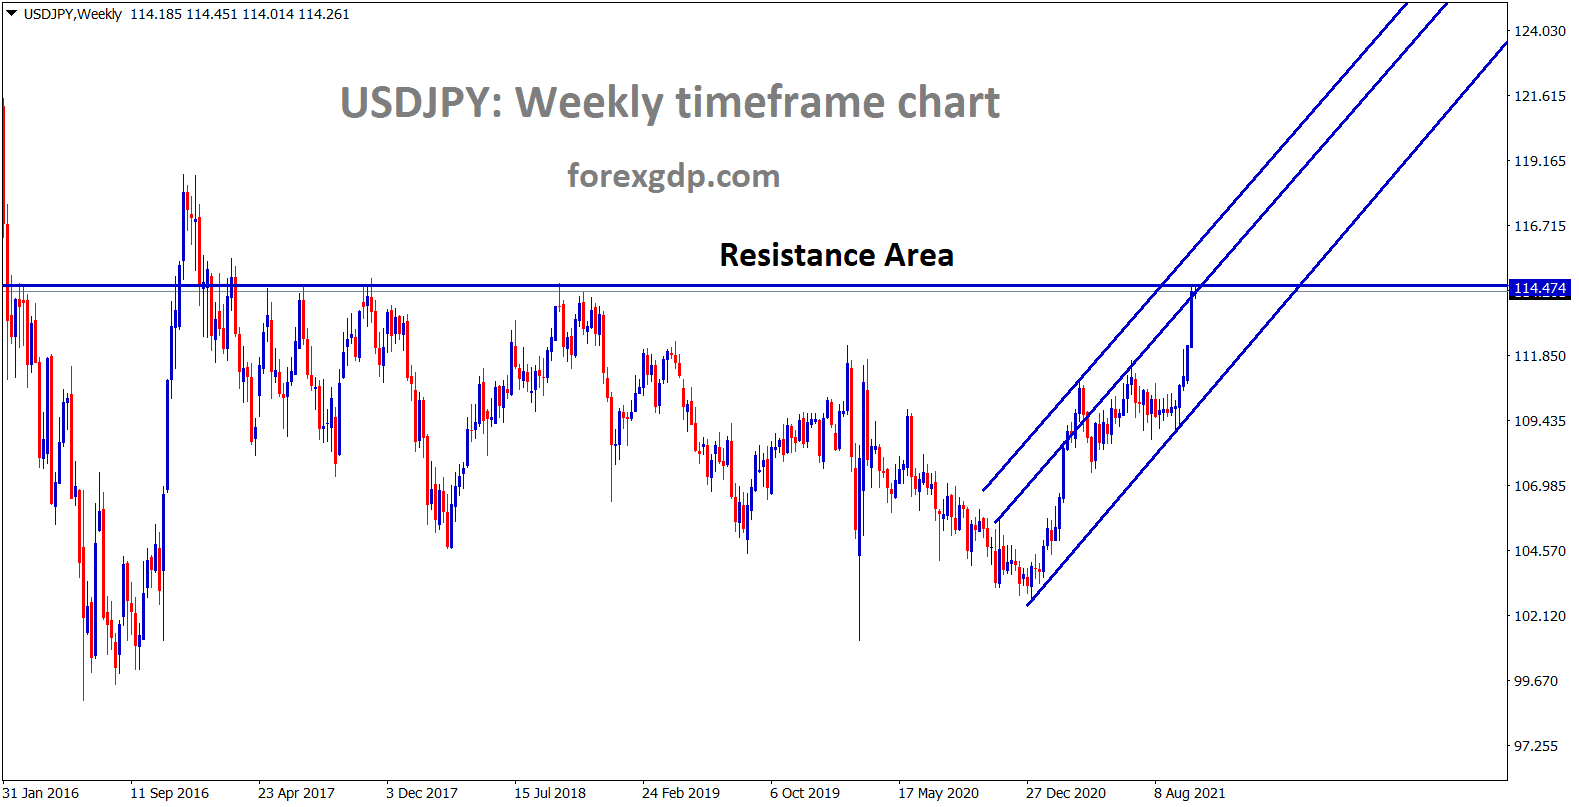 USDJPY is moving in a strong uptrend now standing at the horizontal resistance